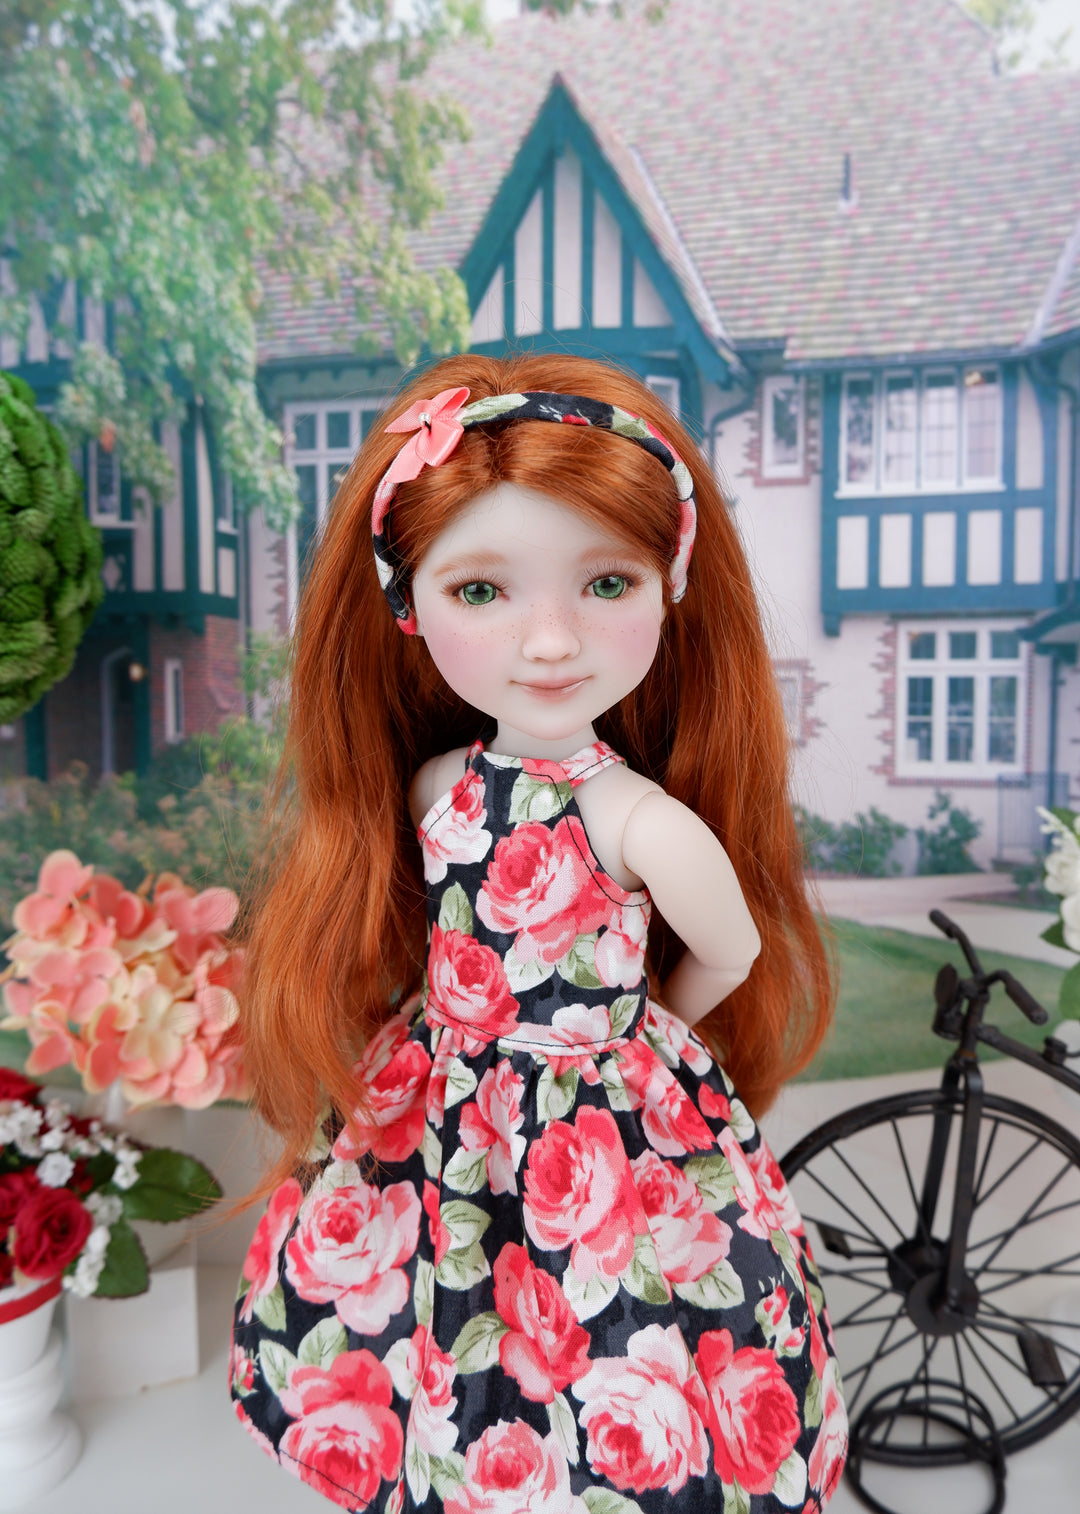 Vibrant Summer Rose - dress with shoes for Ruby Red Fashion Friends doll